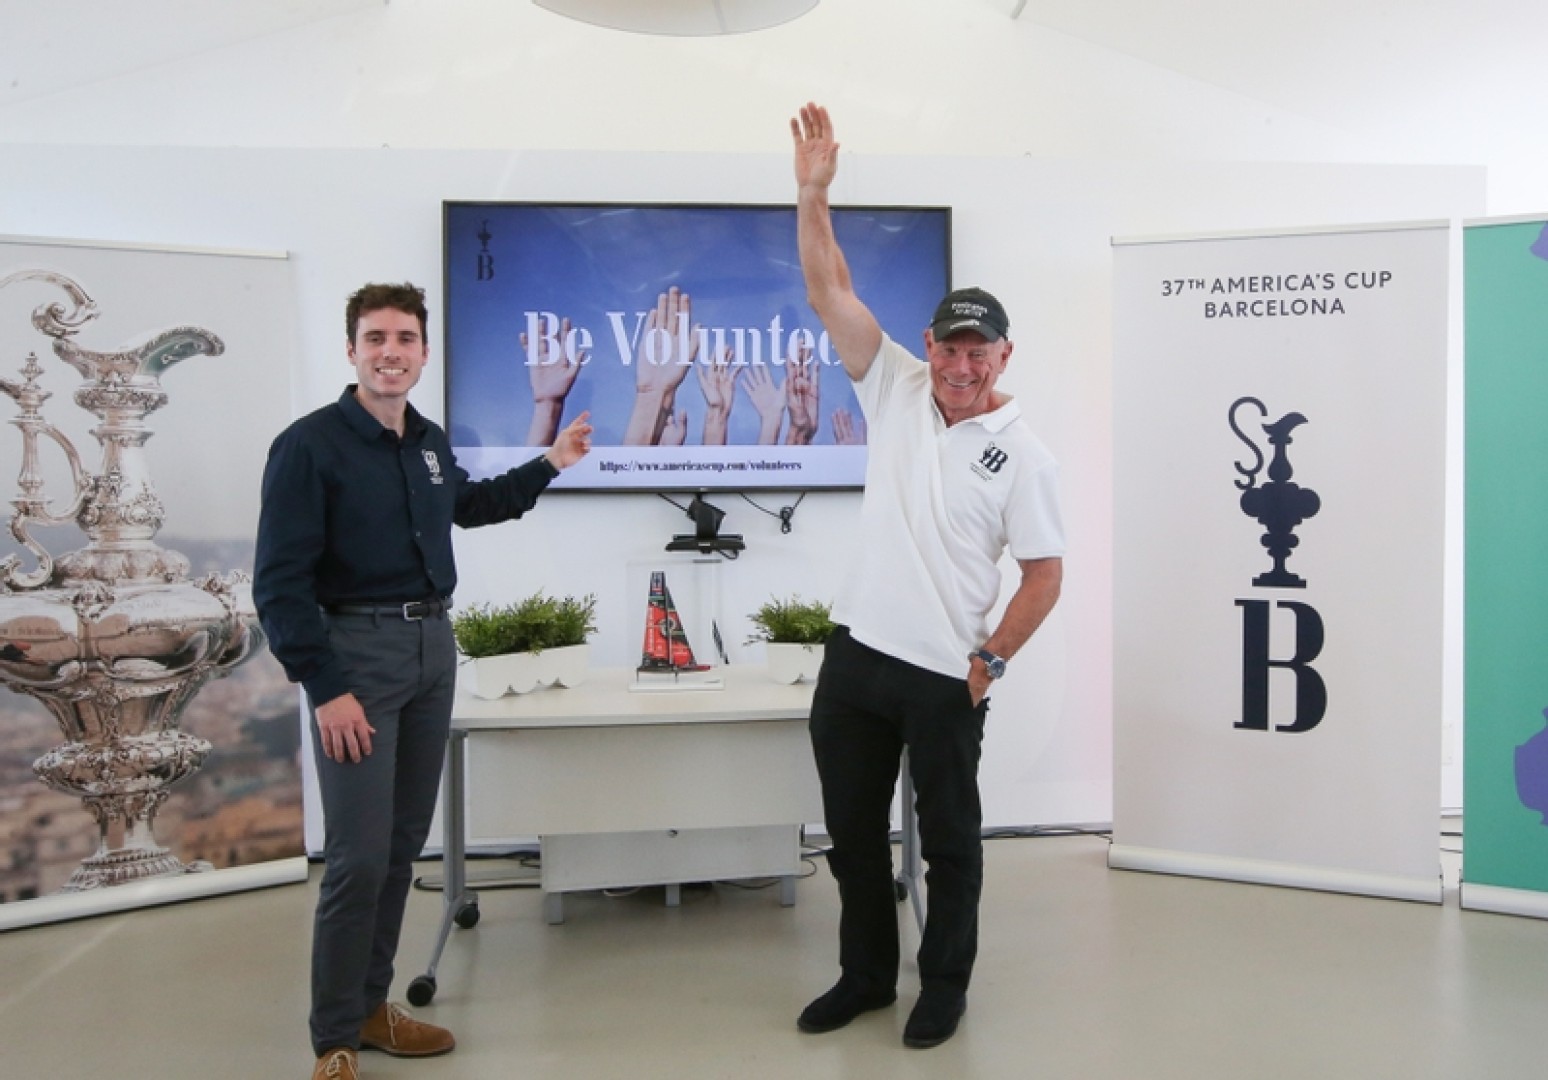 Calling all volunteers for the 37th America’s Cup